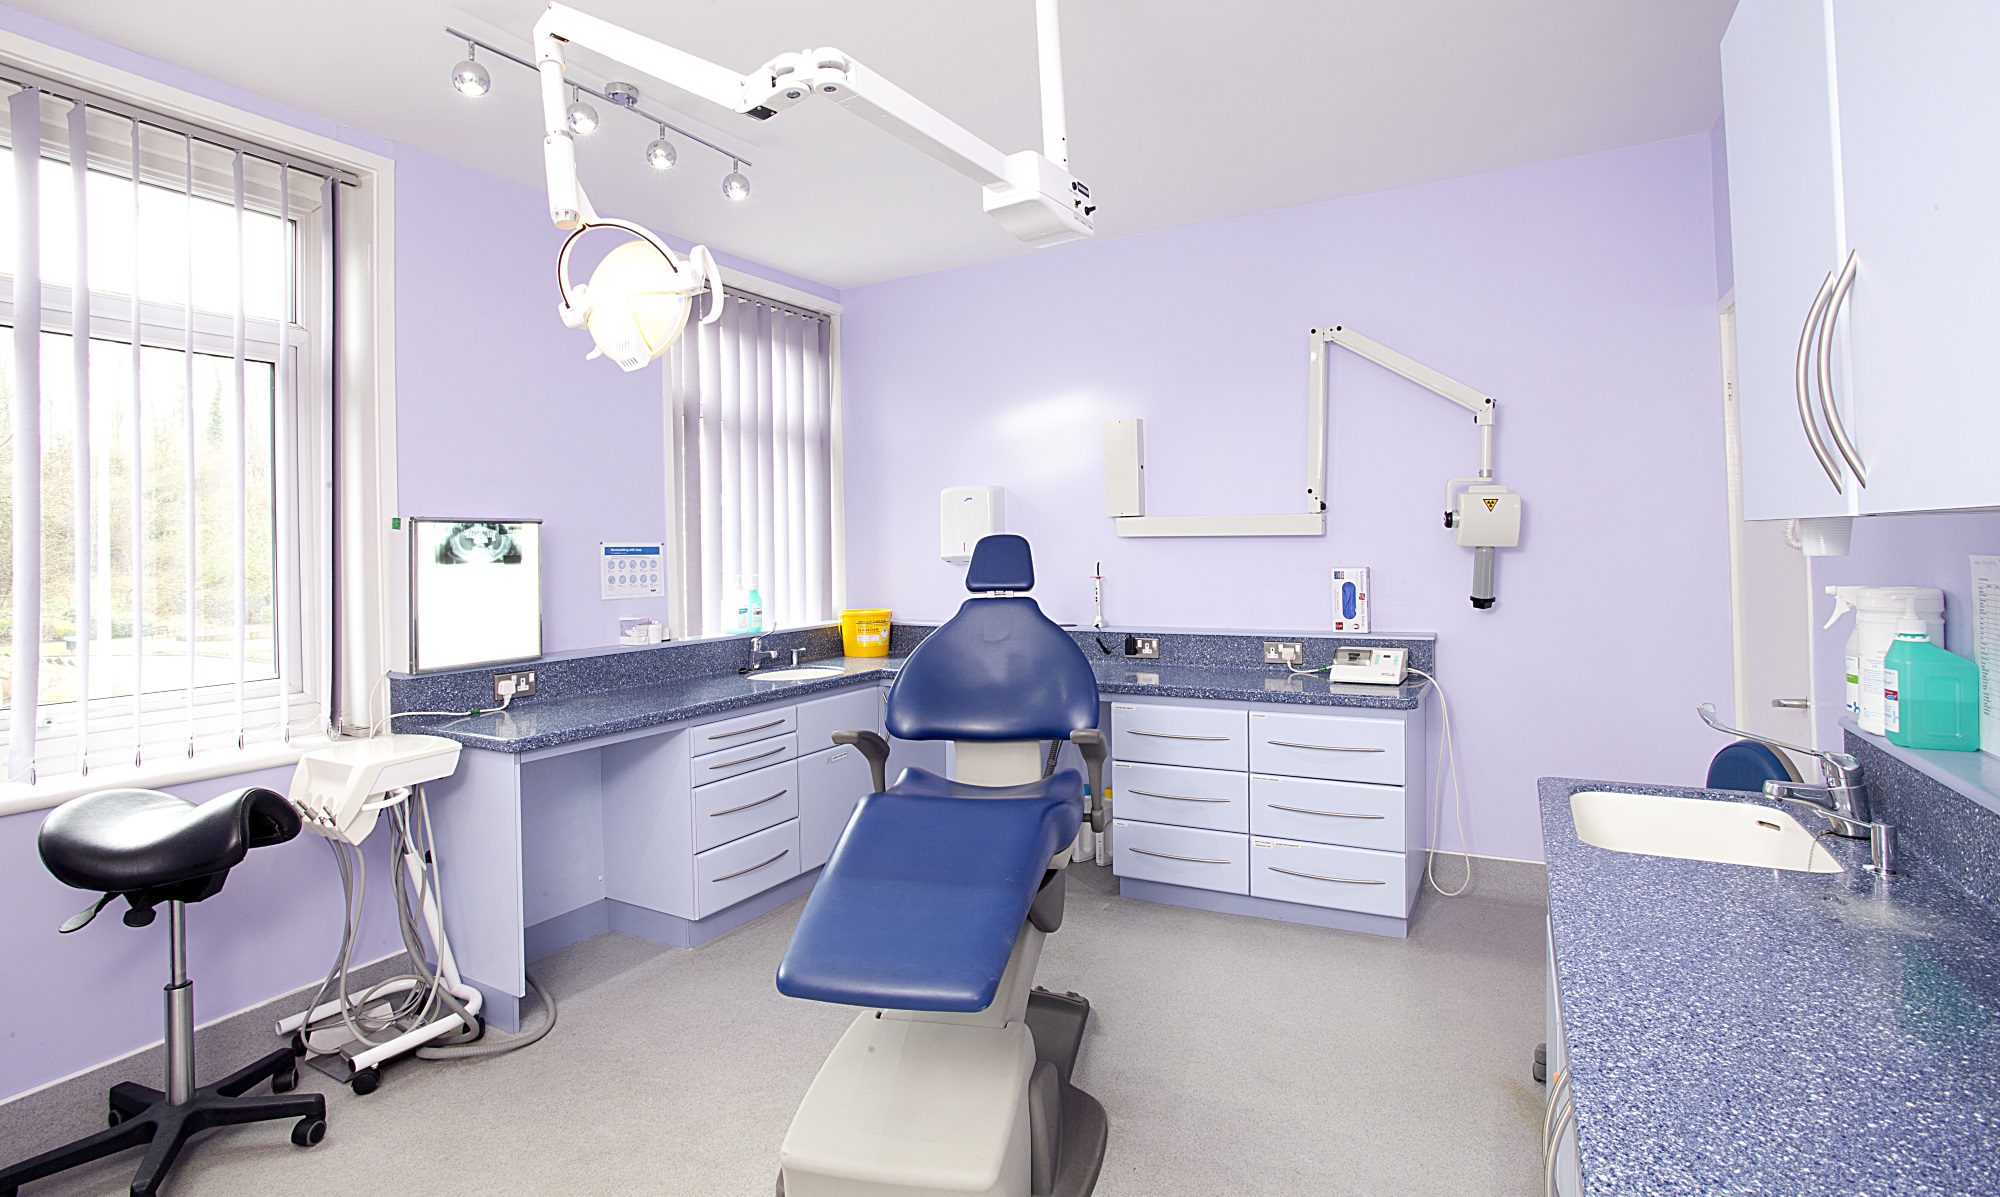 Why sterilisation procedures are so important in a dental practice